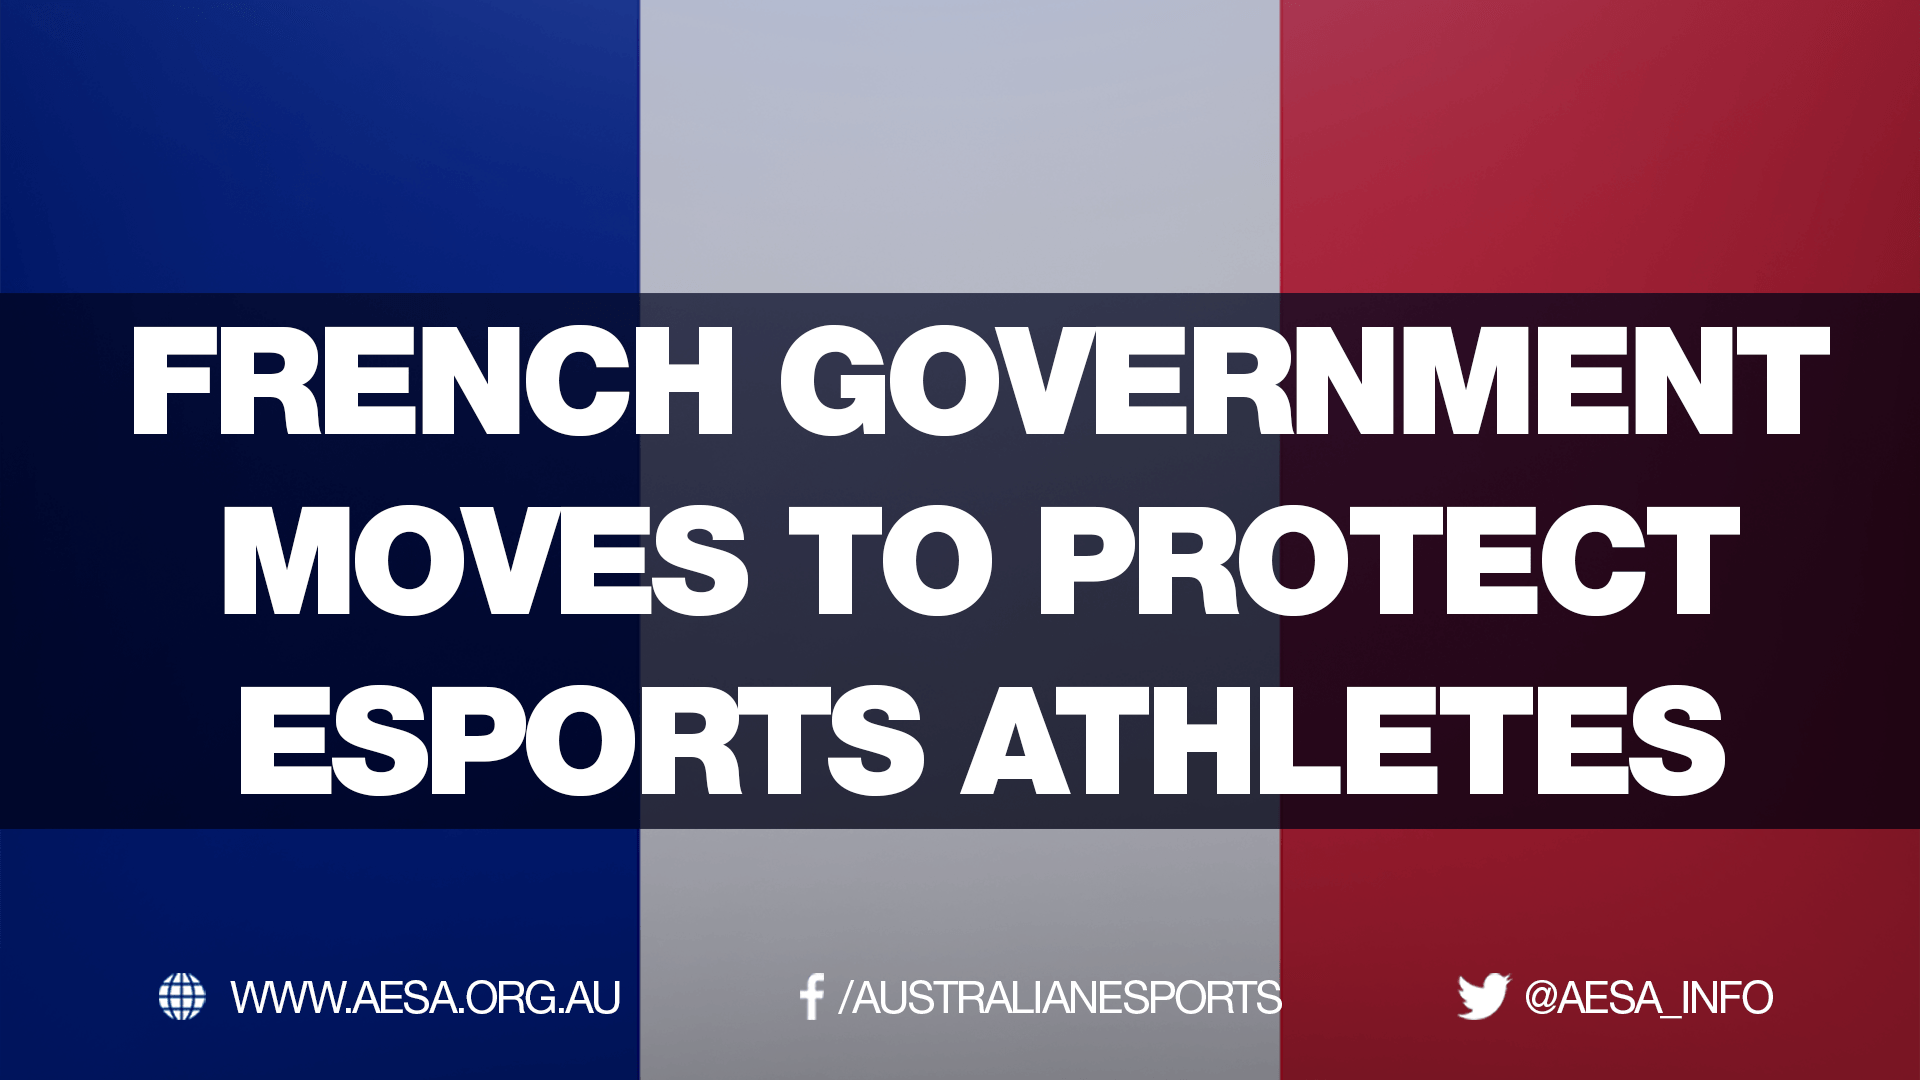 French government moves to protect esports athletes!